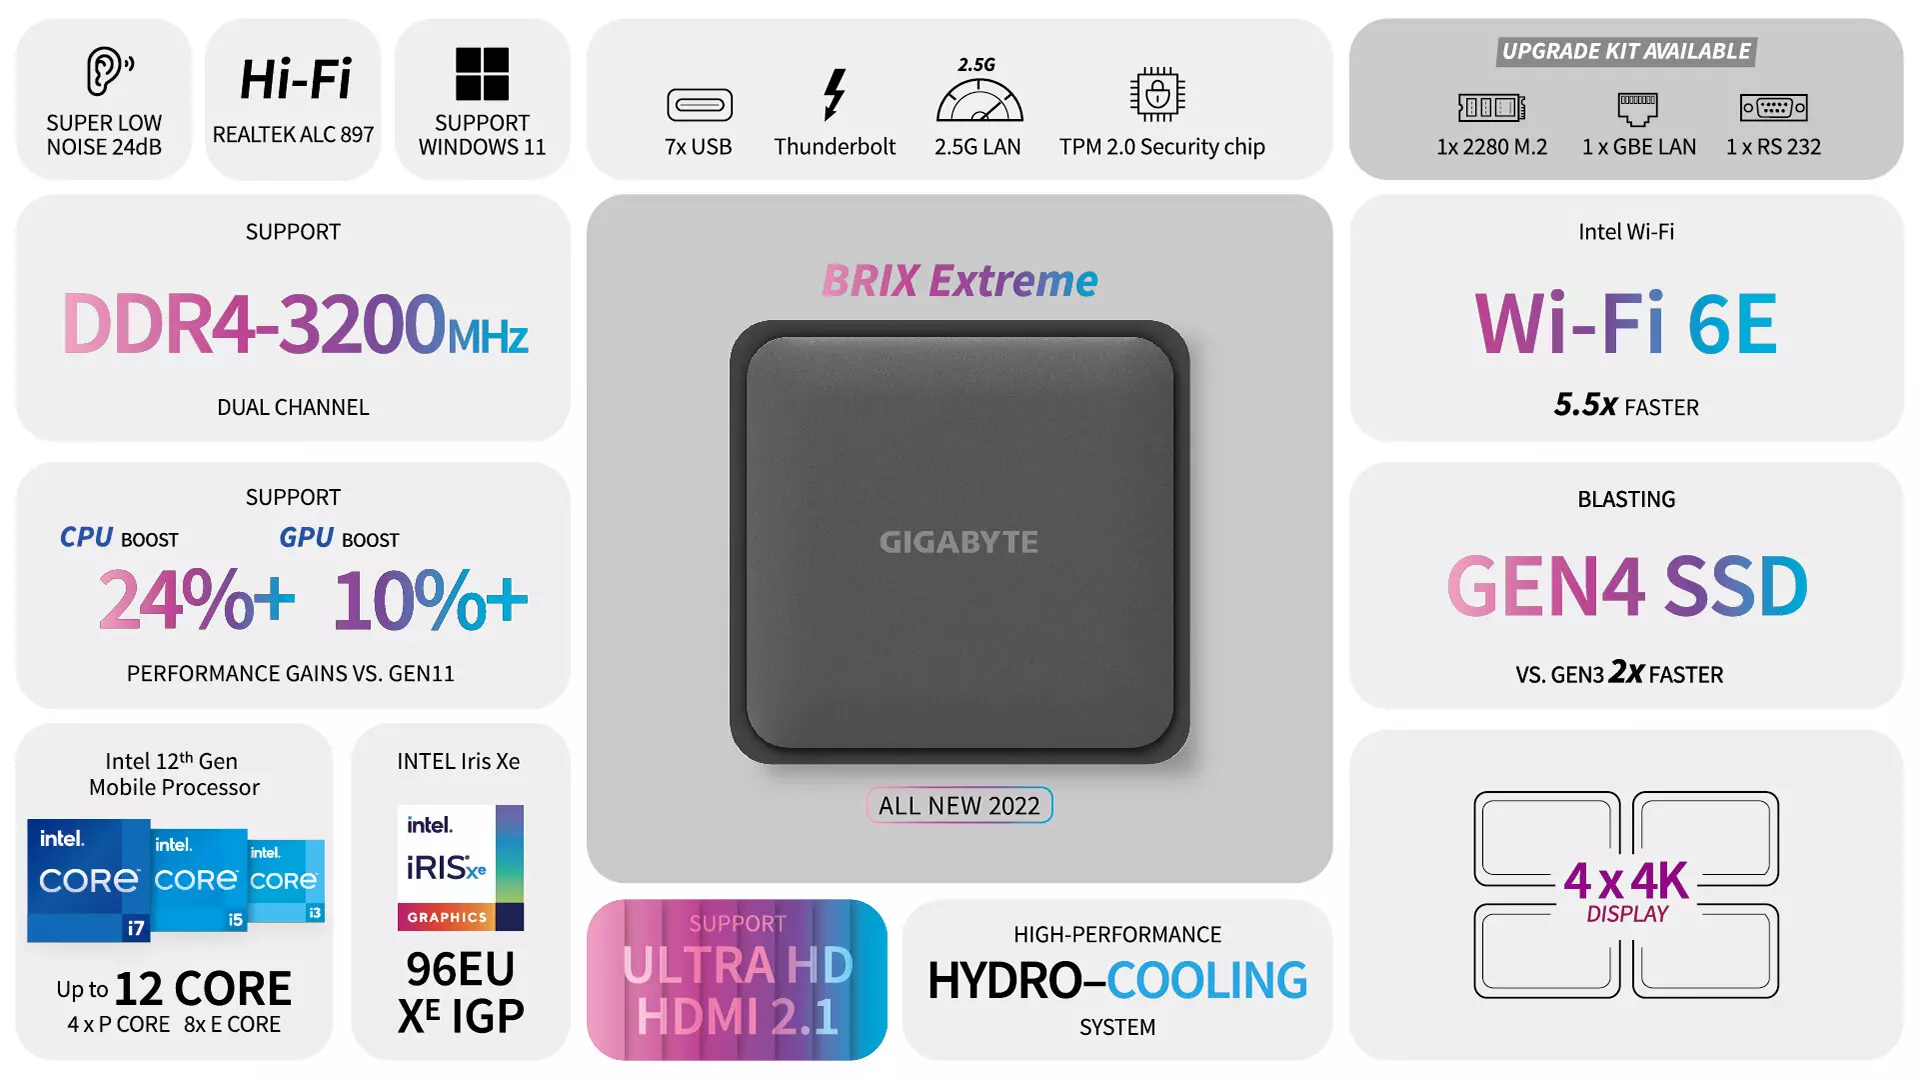 Gigabyte's new compact systems offer WiFi 6 and HDMI 2.1